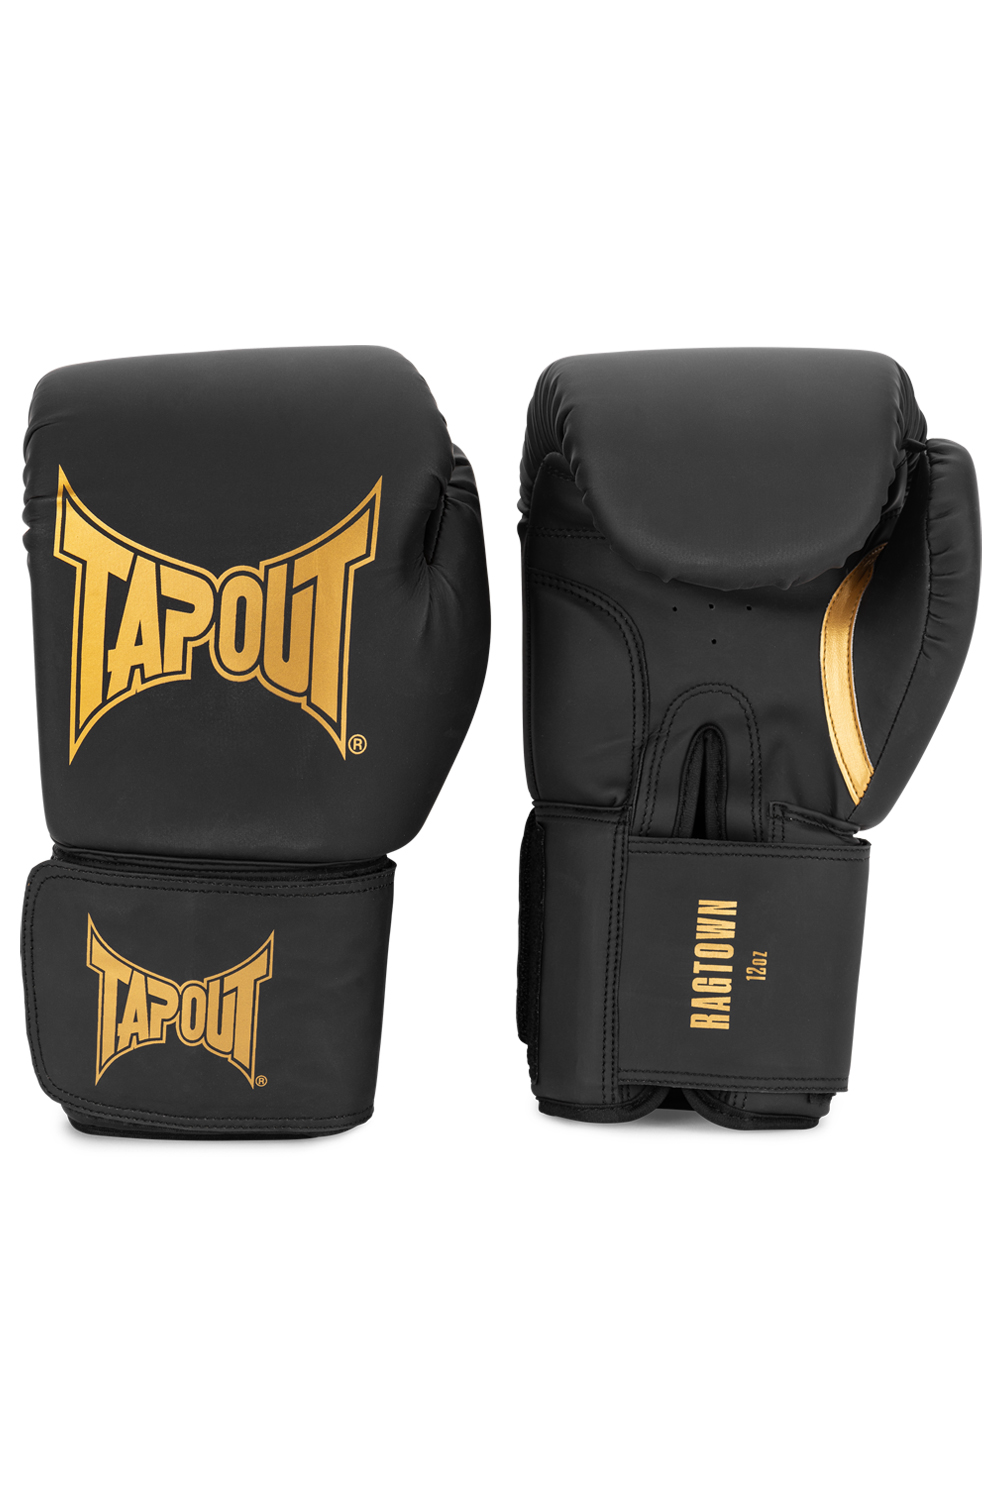 Tapout Artificial Leather Boxing Gloves (1pair)